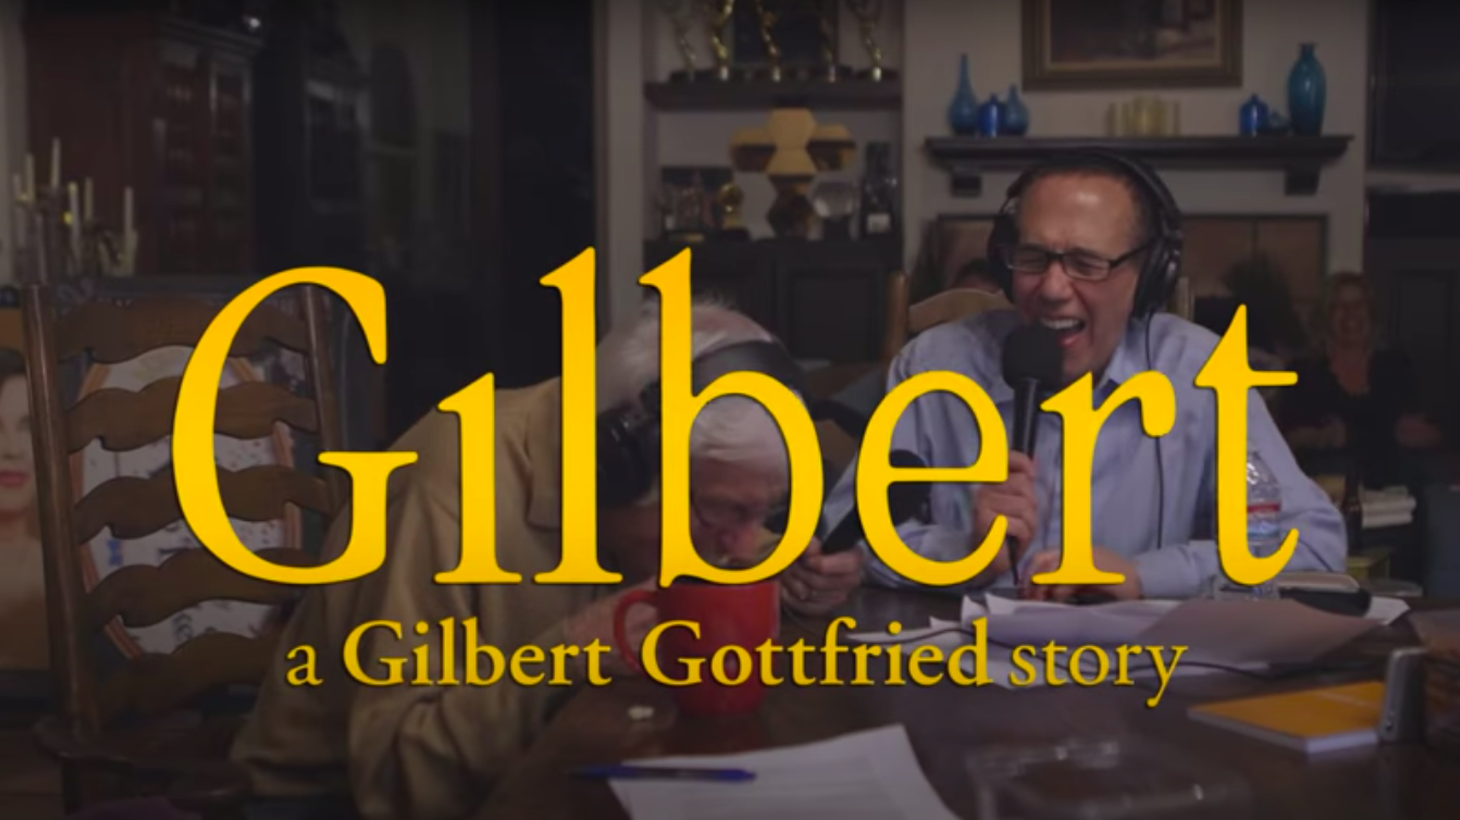 Gilbert Gottfried became famous in the 1980s through his brash comedy, and decades later, he reinvented himself as a family man.